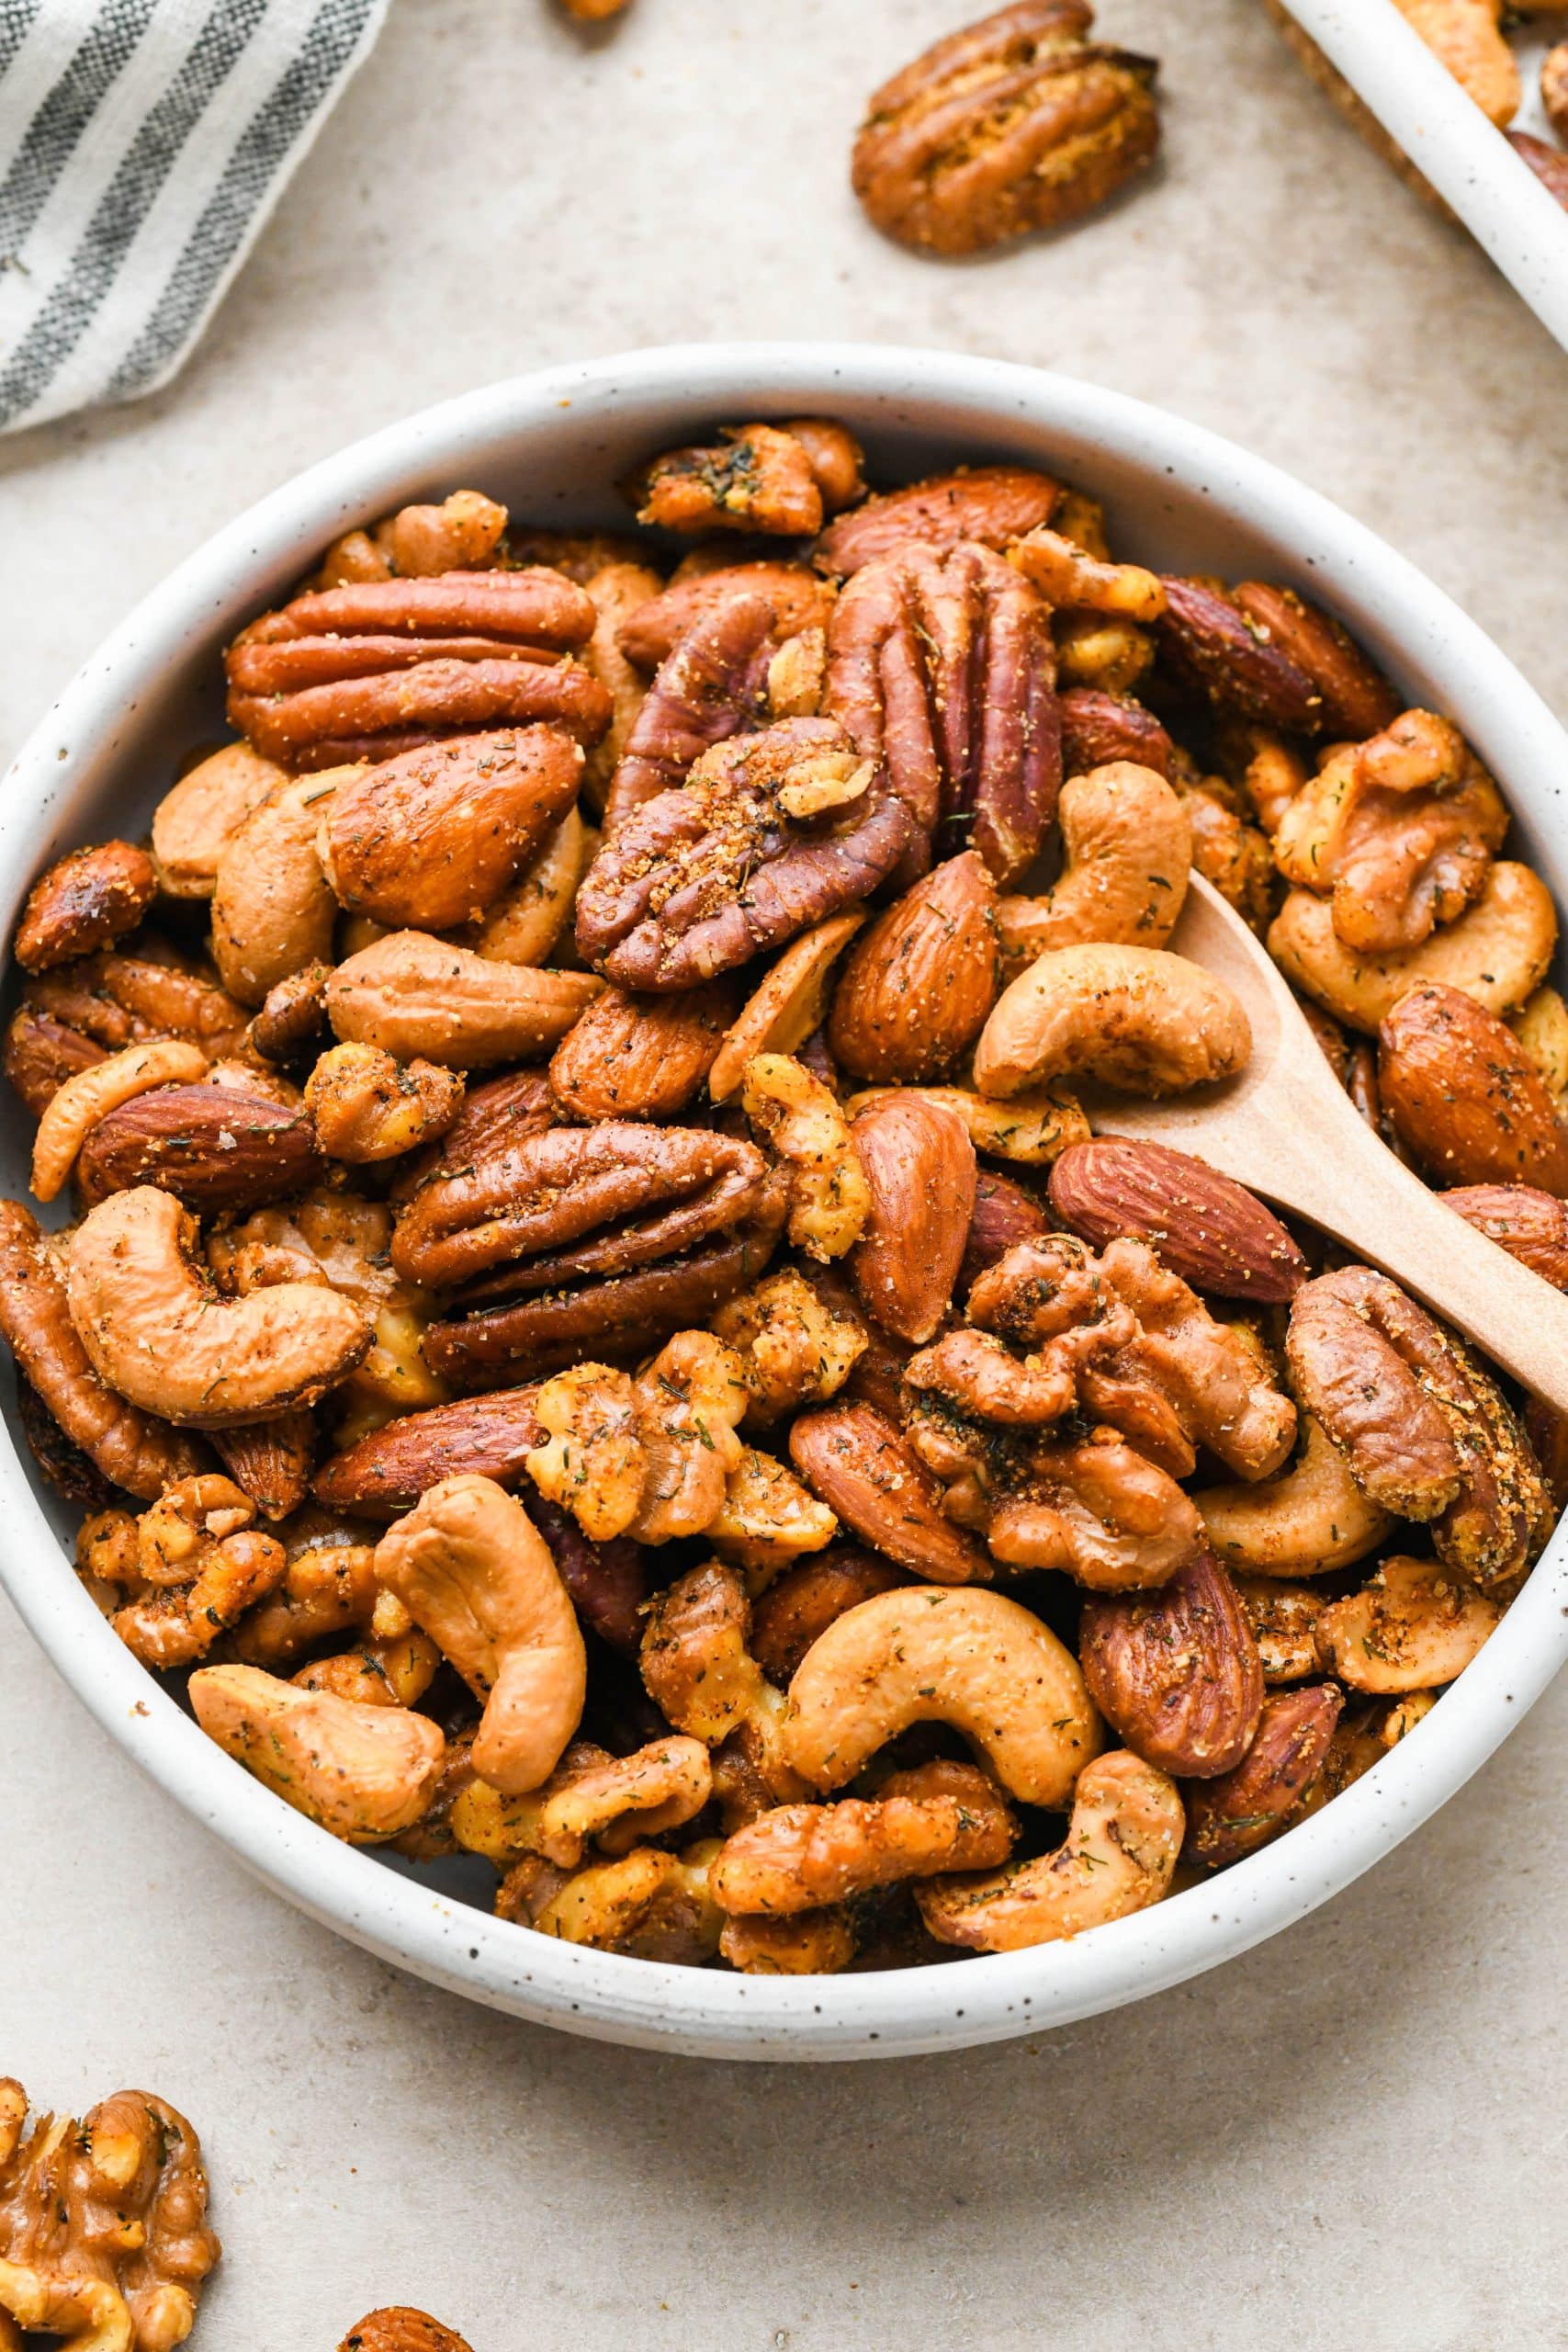 How To Make Roasted Nuts - Spicy Honey Roasted Mixed Nuts 